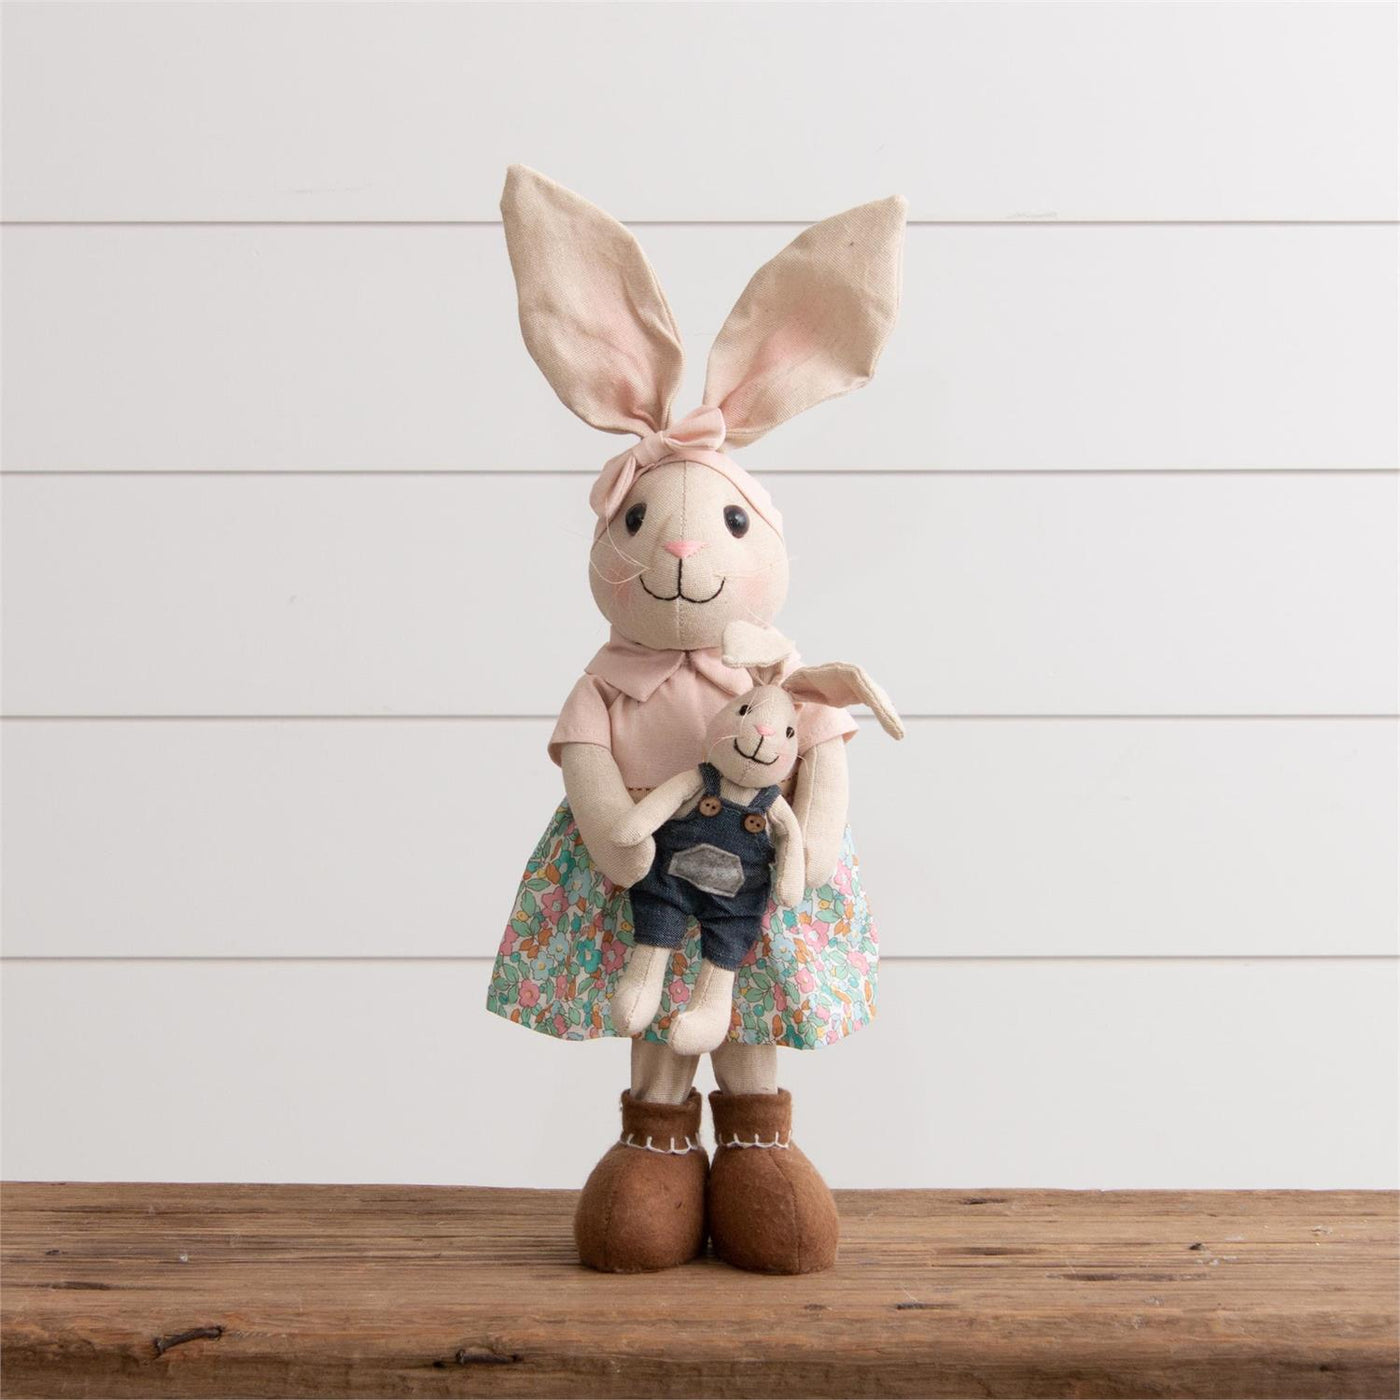 Miss Bella Rabbit Fabric Figure With Bunny Doll 21" H